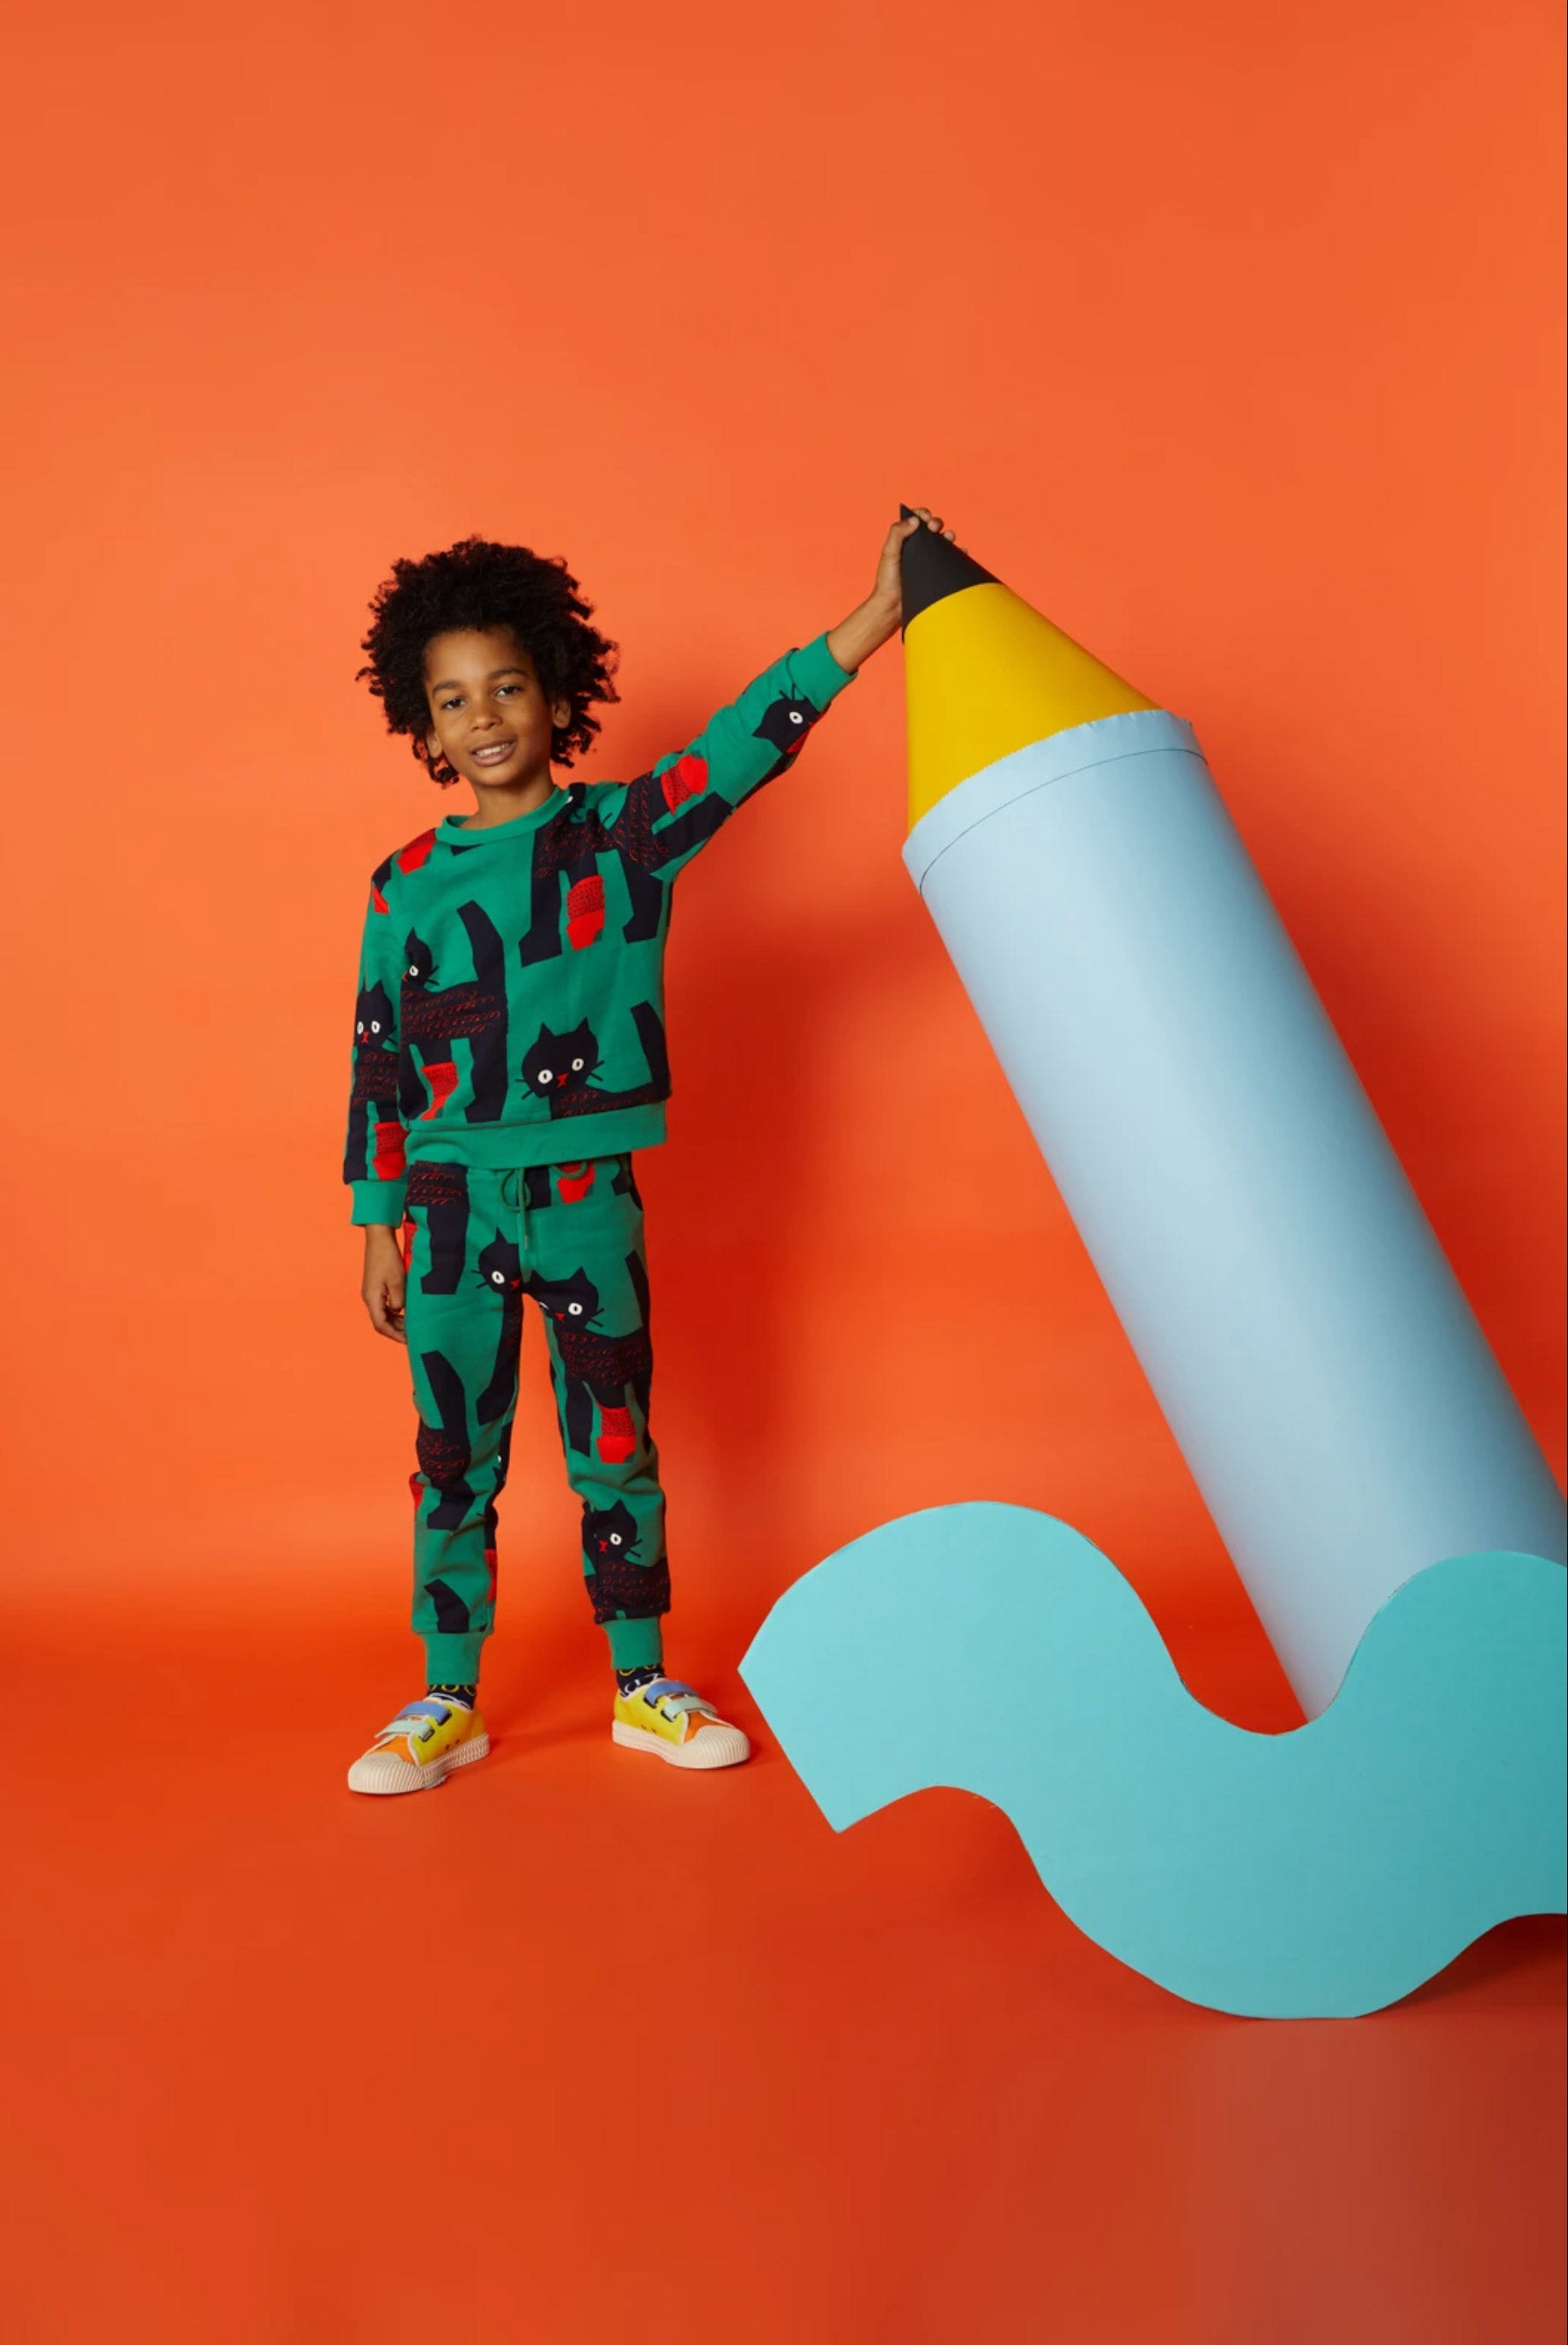 A boy in colourful clothes stands against an orange background with an oversized blue pencil prop, and a yellow abstract cardboard cutout prop with blue polkadots. 